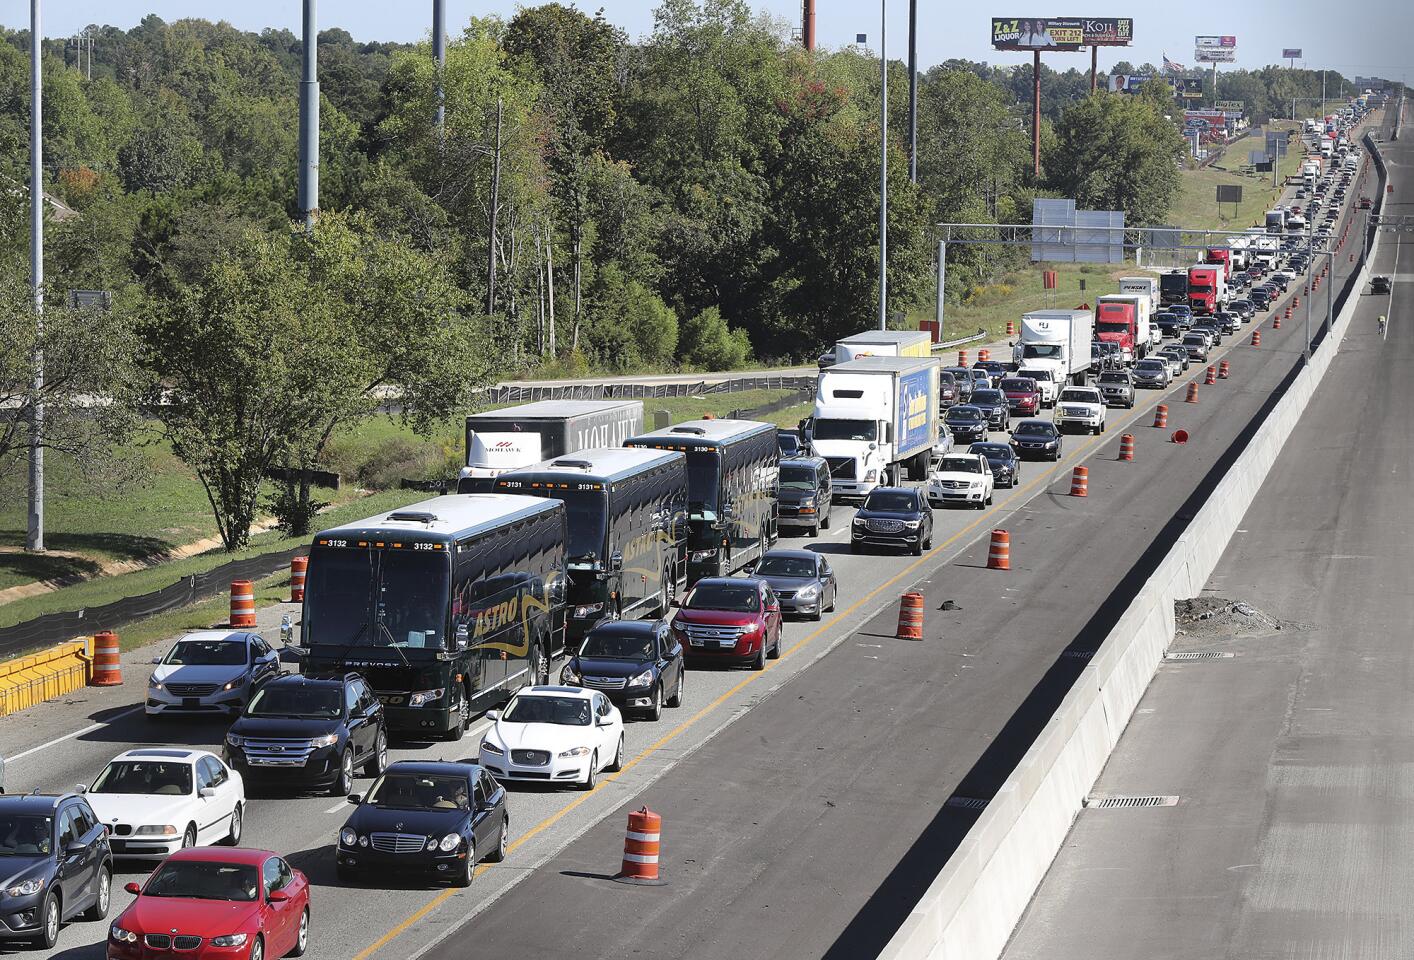 Traffic stacks up on I-75 North fleeing the coast and Hurricane Matthew on Thursday, Oct. 6, 2016, near McDonough, Georgia. Jim Butterworth, director at the Georgia Emergency Management and Homeland Security Agency, says he expects the storm to arrive in coastal Georgia late Friday and continue through Saturday night.